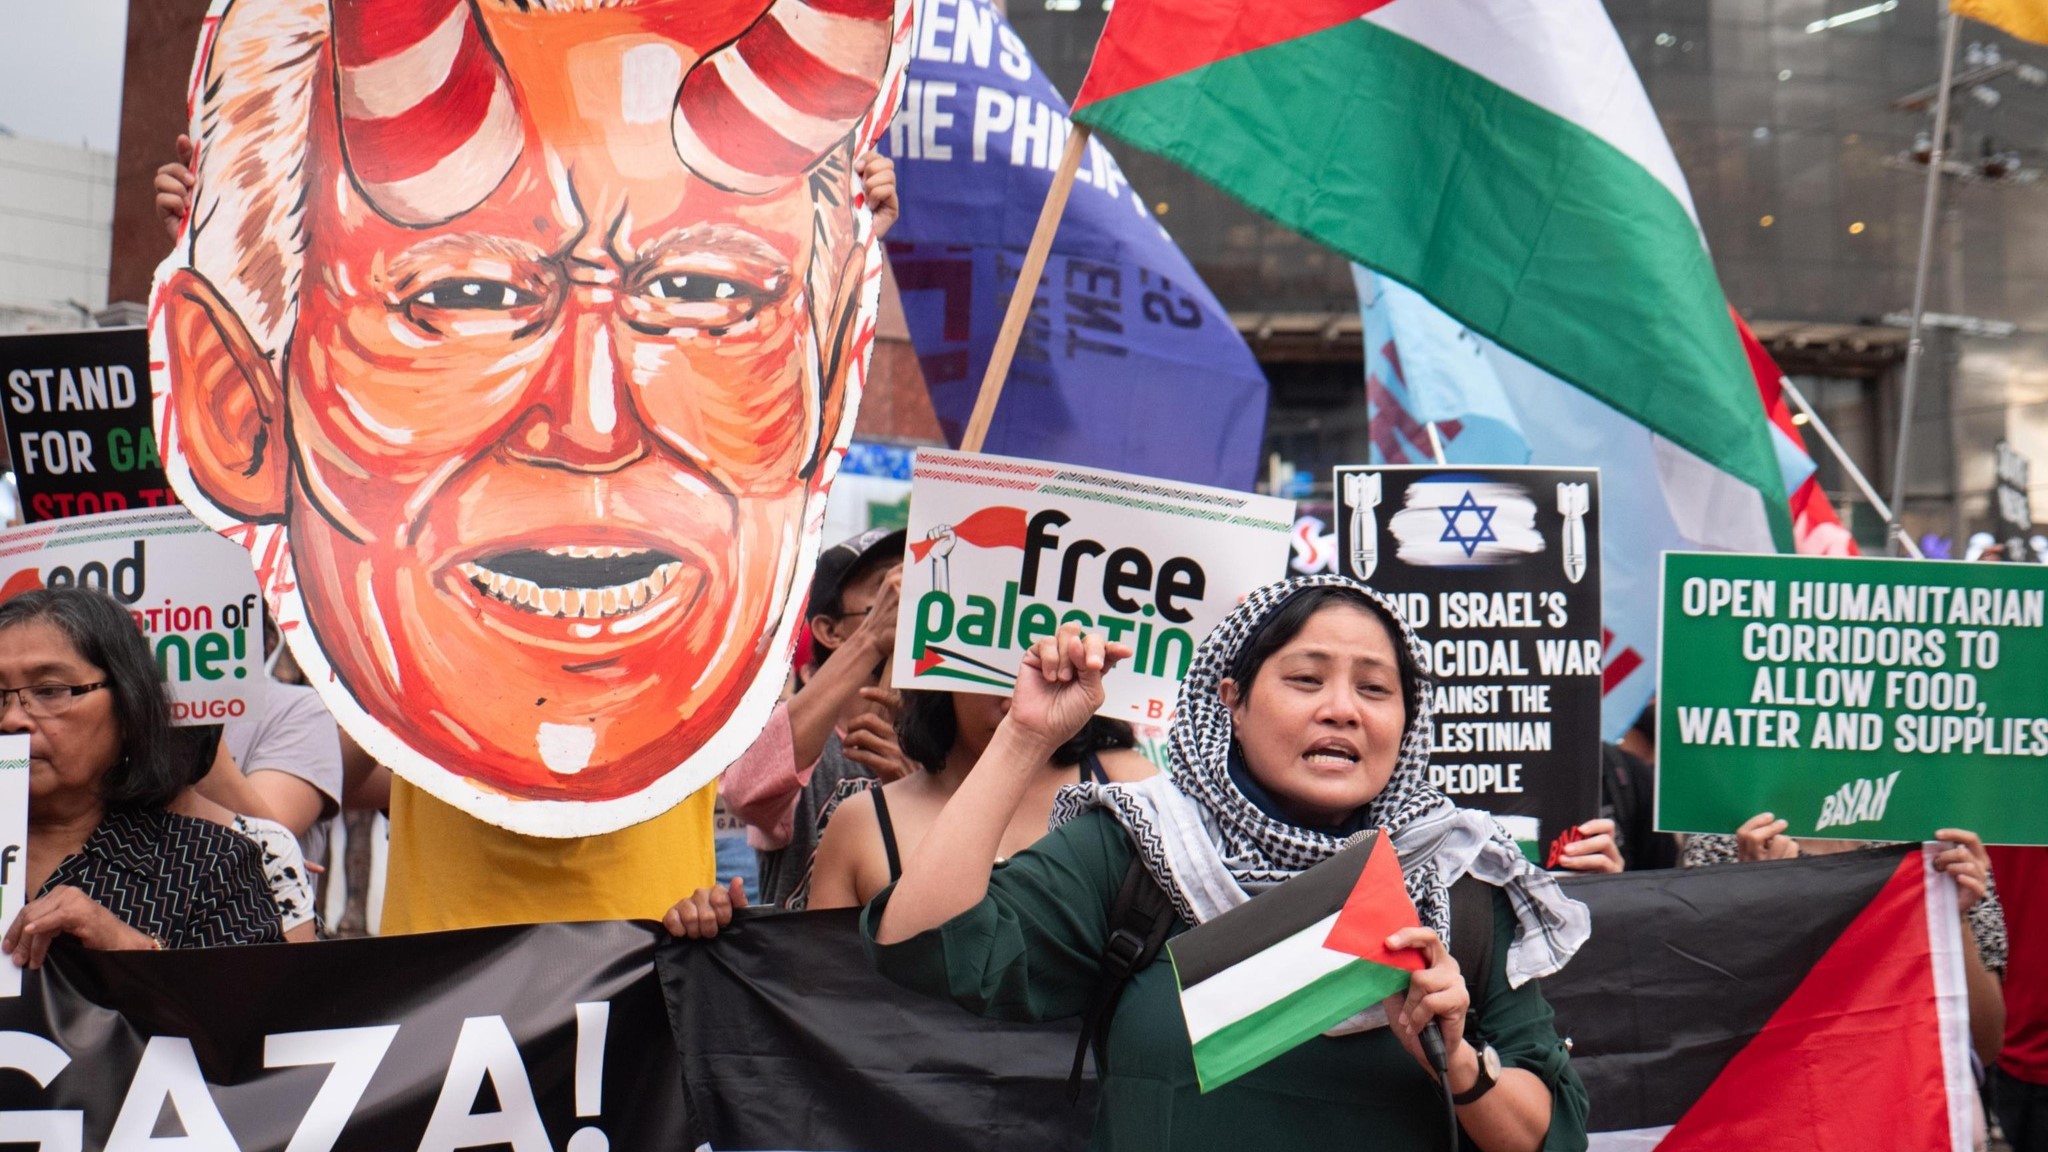 PISTON - a protest in the Philippines in support of Palestine